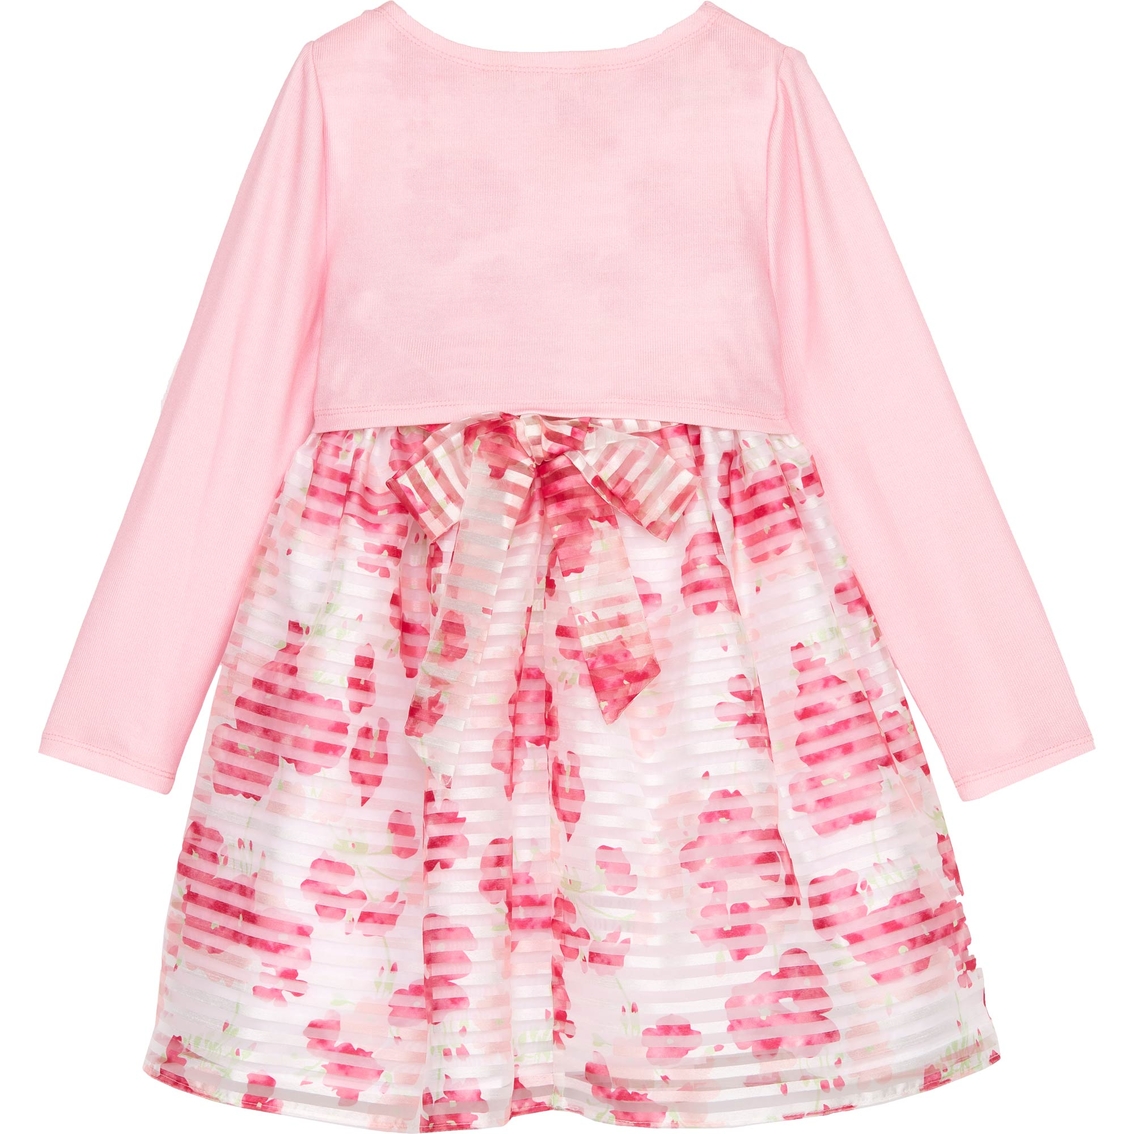 Purple Rose Little Girls Shadow Stripe Floral Dress with Pink Shrug - Image 2 of 2